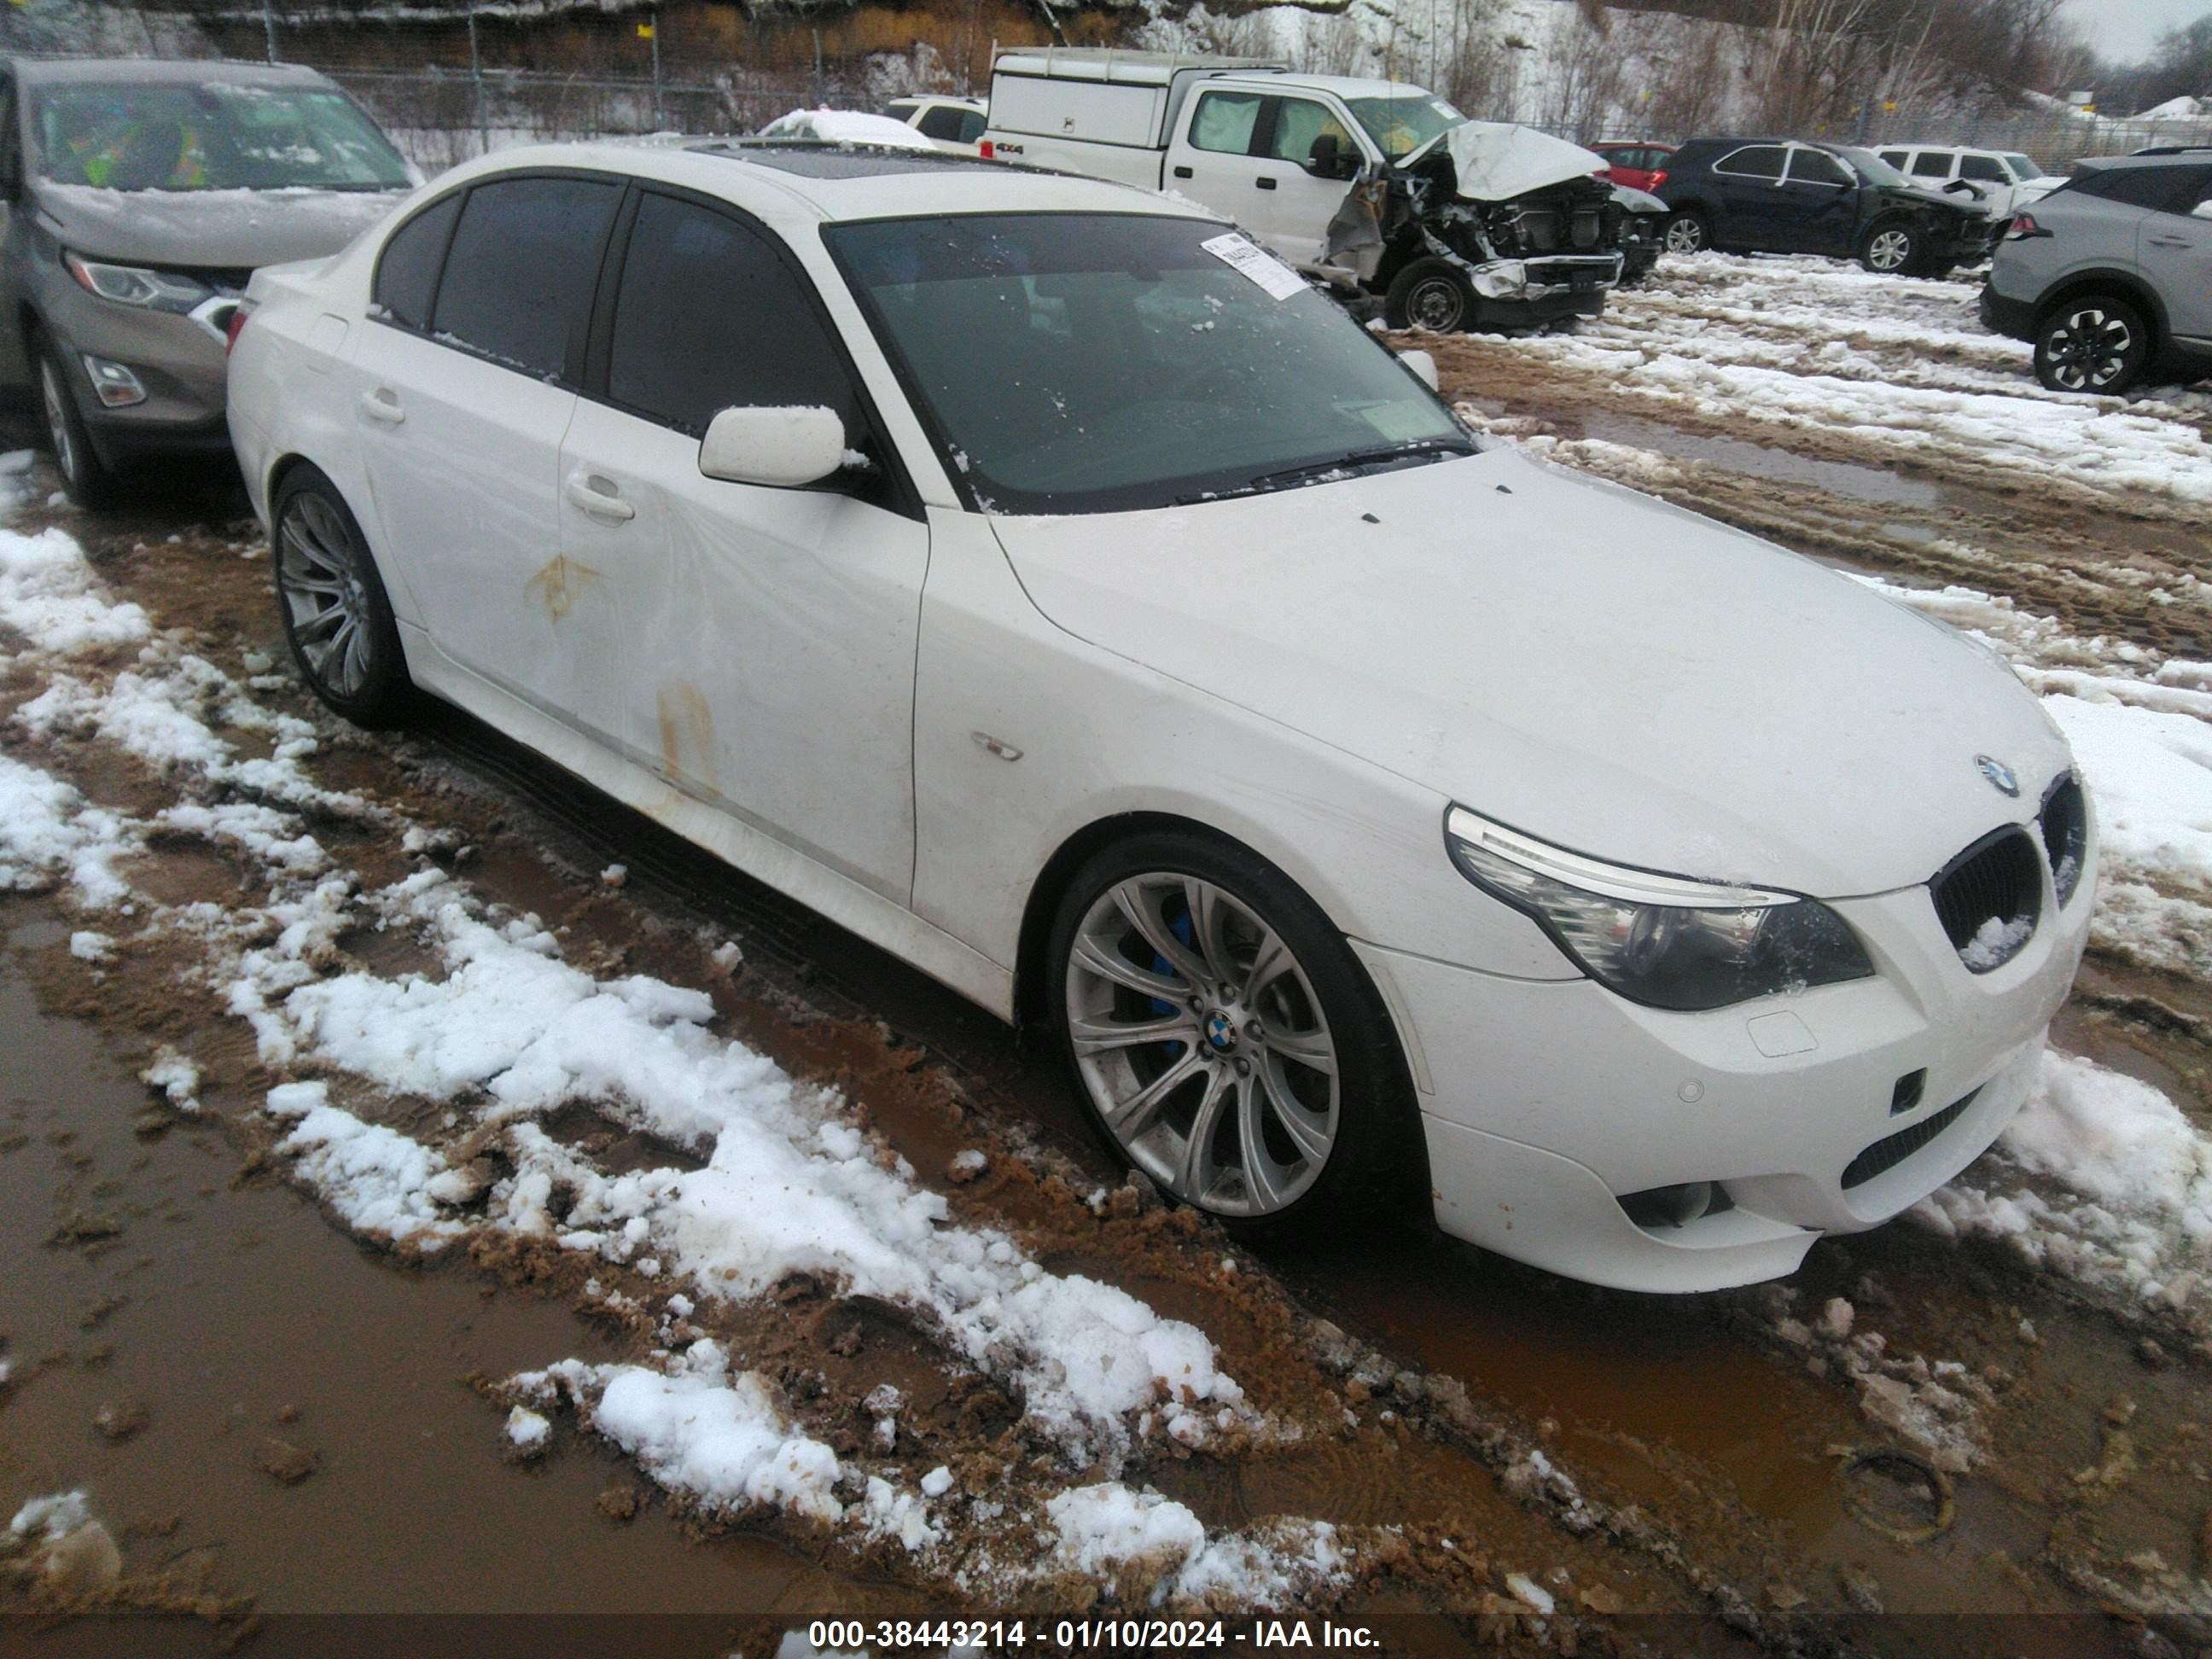 vin: WBANW53538CT53381 WBANW53538CT53381 2008 bmw 5er 4800 for Sale in 60118, 605 Healy Road, East Dundee, Illinois, USA